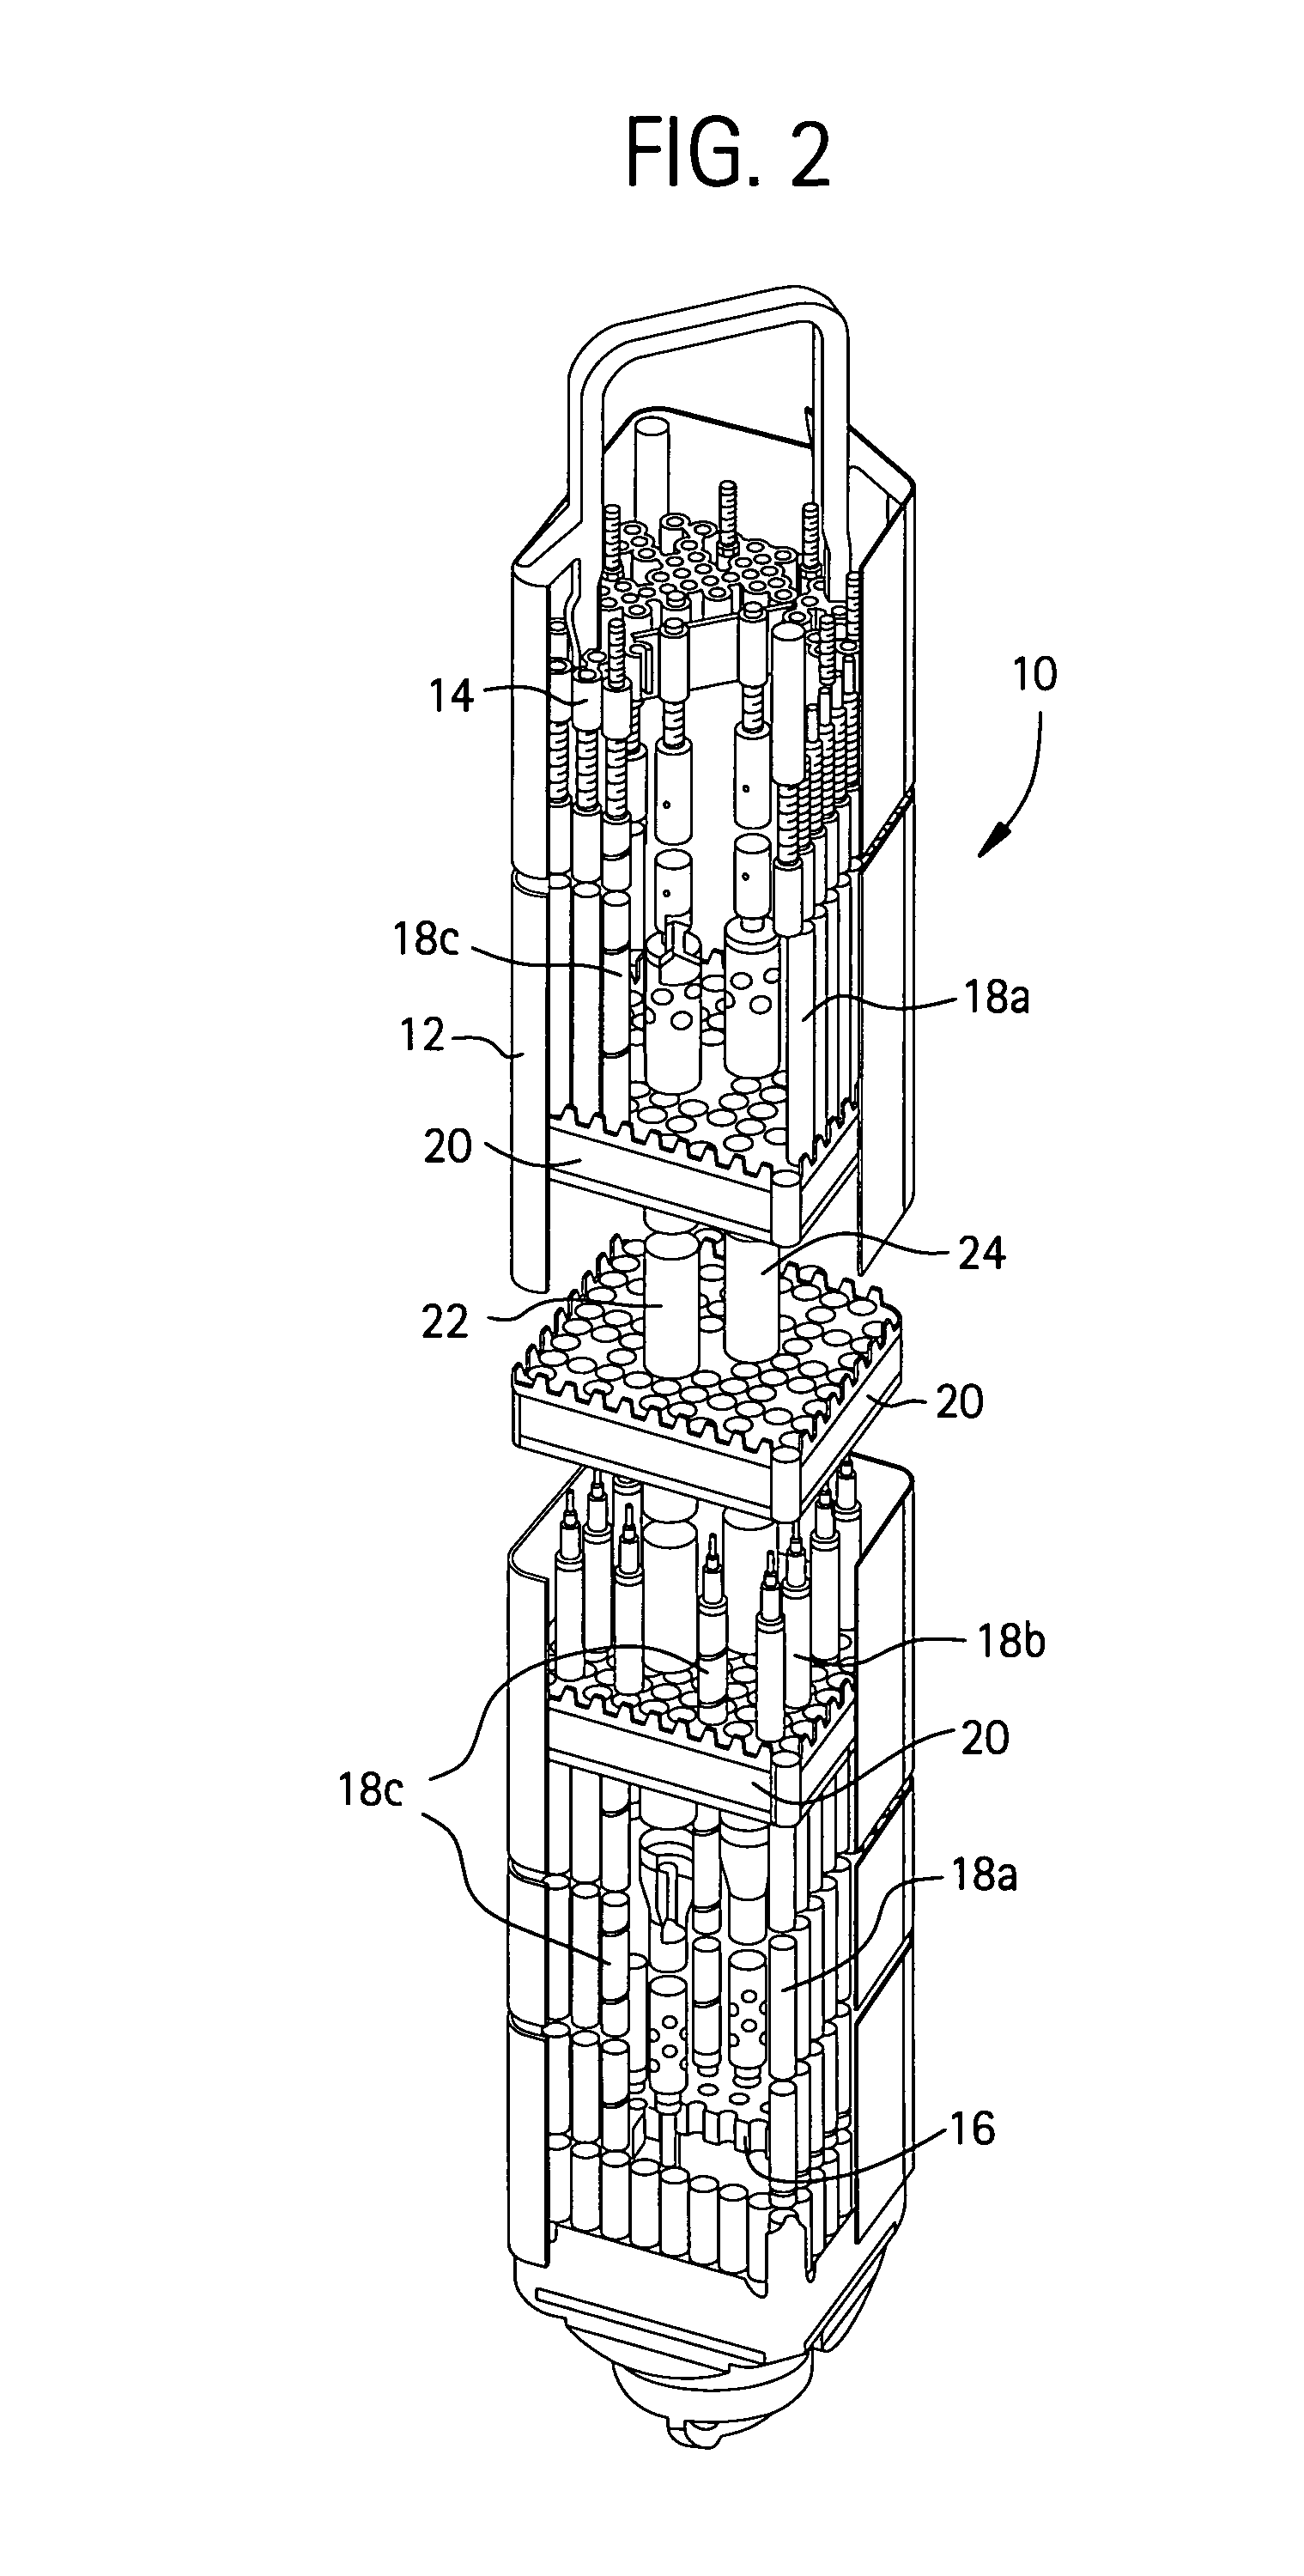 Method of producing isotopes in power nuclear reactors